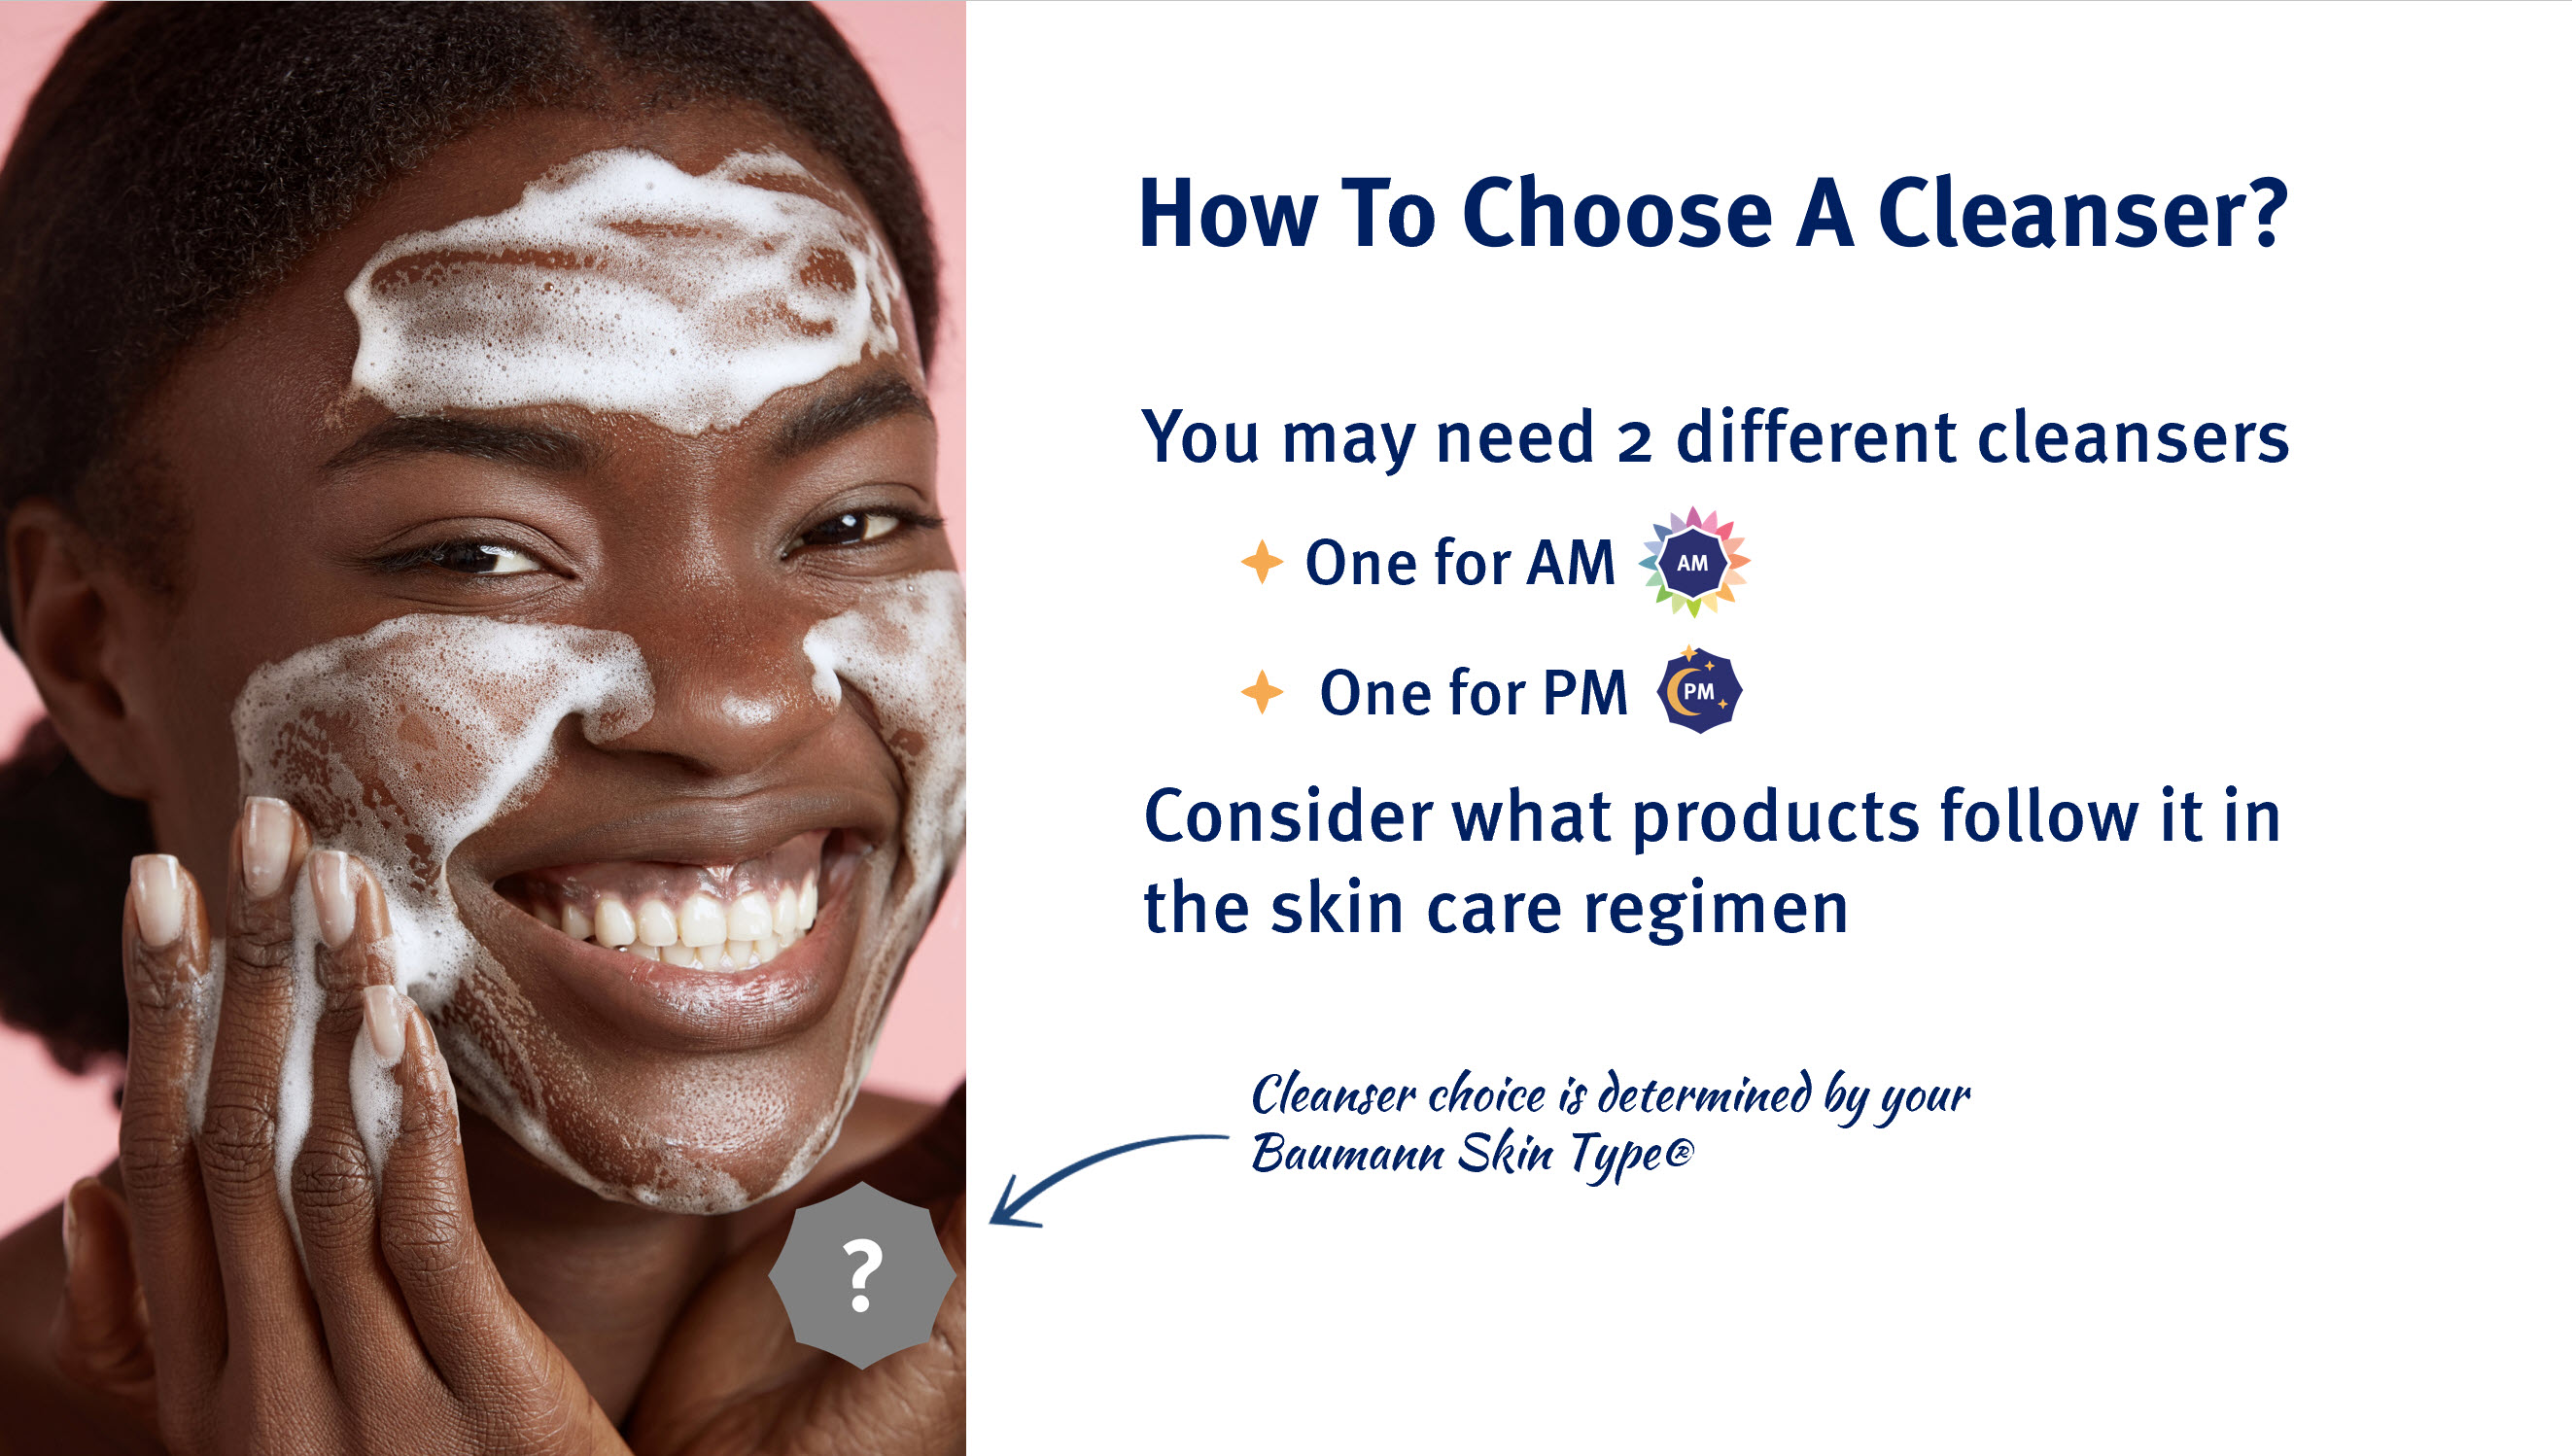 Do You Need Two Cleansers?